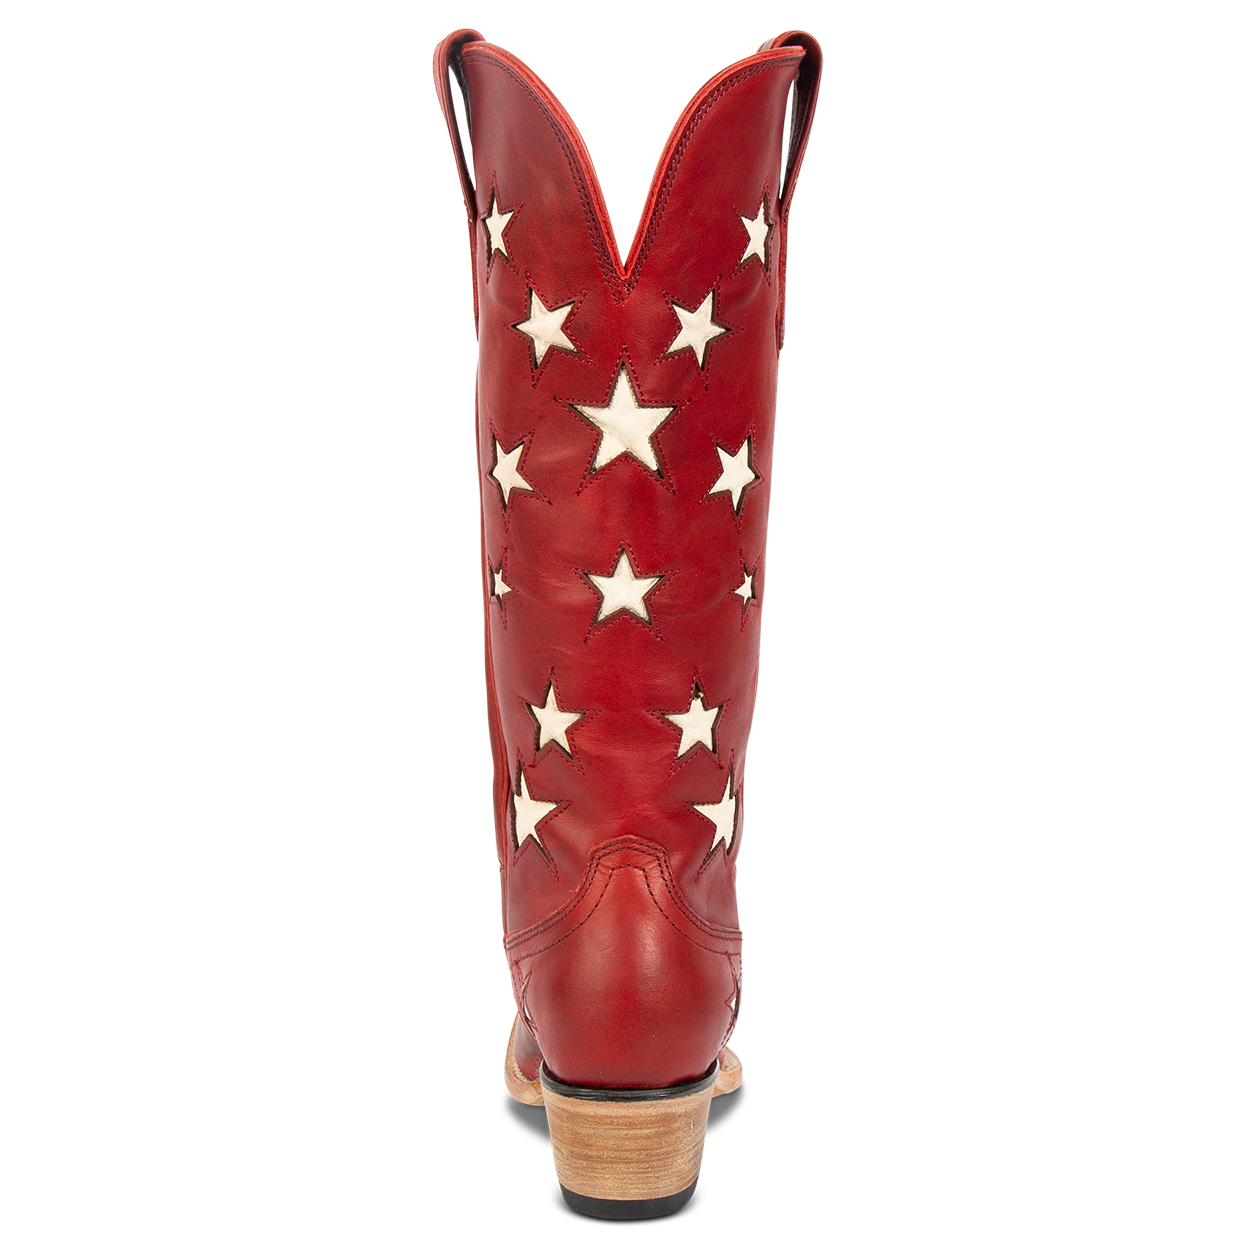 Back view showing star inlay detailing and low heel on FREEBIRD women's Starzz red western boot